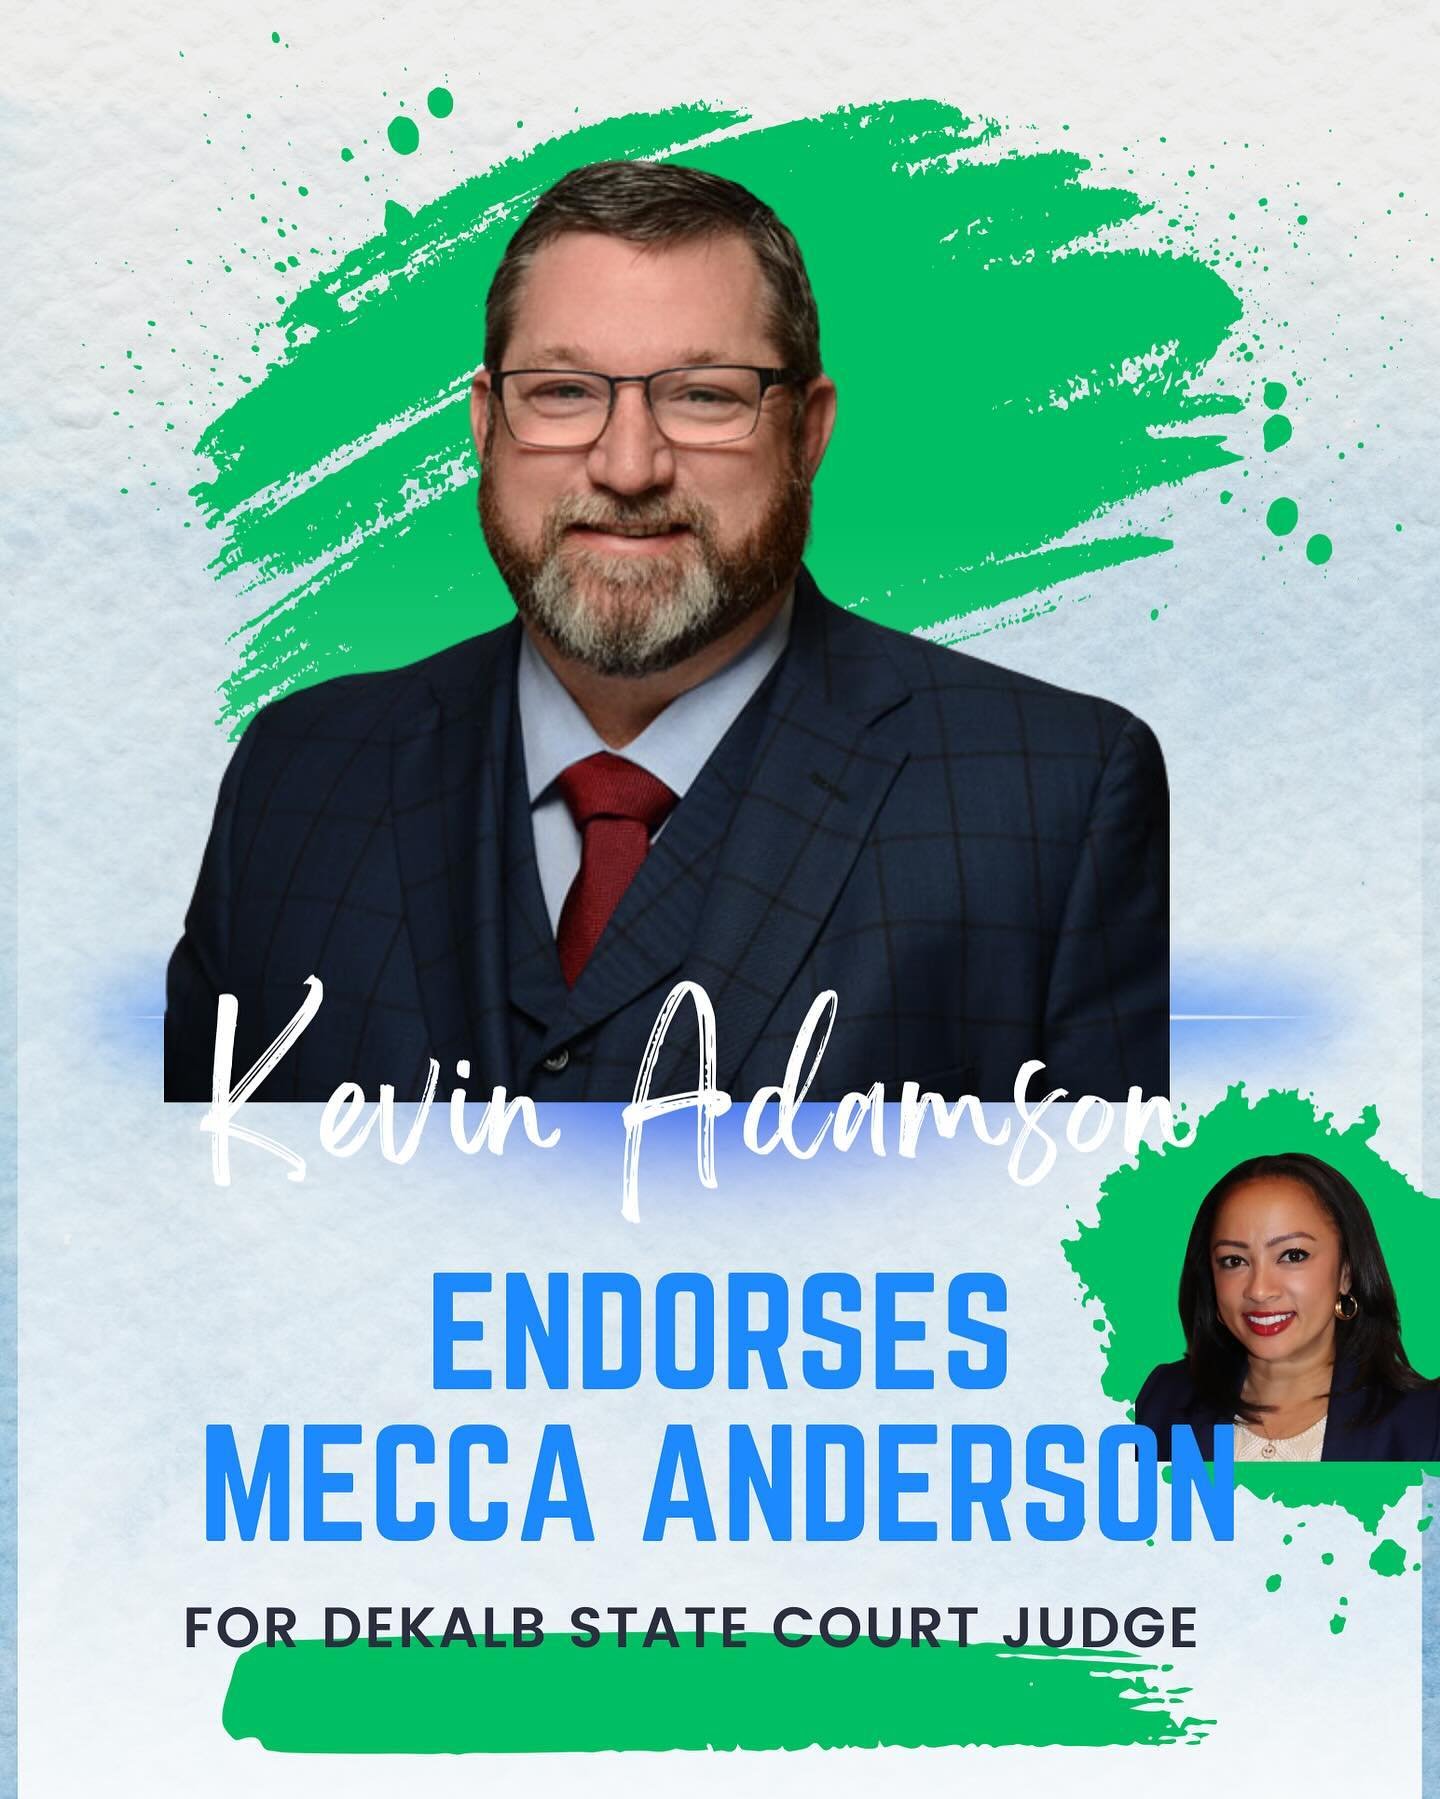 Kevin Adamson, a prominent attorney in Atlanta, has made a significant impact on my legal career. As a respected legal professional, Kevin Adamson P.C. has endorsed me for the position of DeKalb State Court Judge, a testament to his confidence in my 